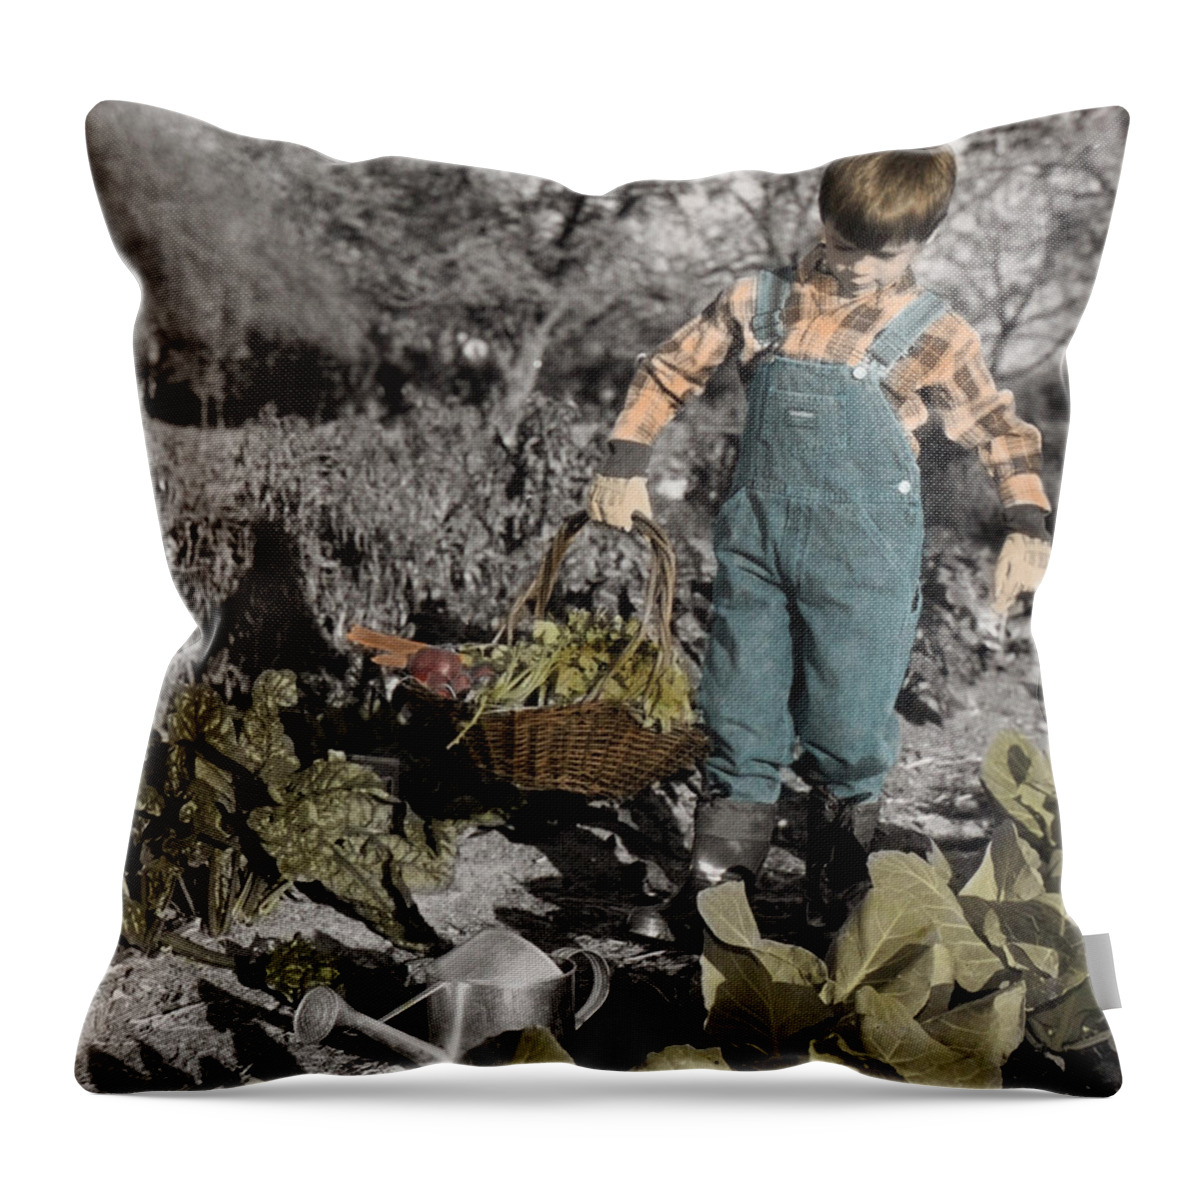 The Twelve Gifts Of Birth Throw Pillow featuring the photograph The Twelve Gifts of Birth - Talent 1 by Jill Reger